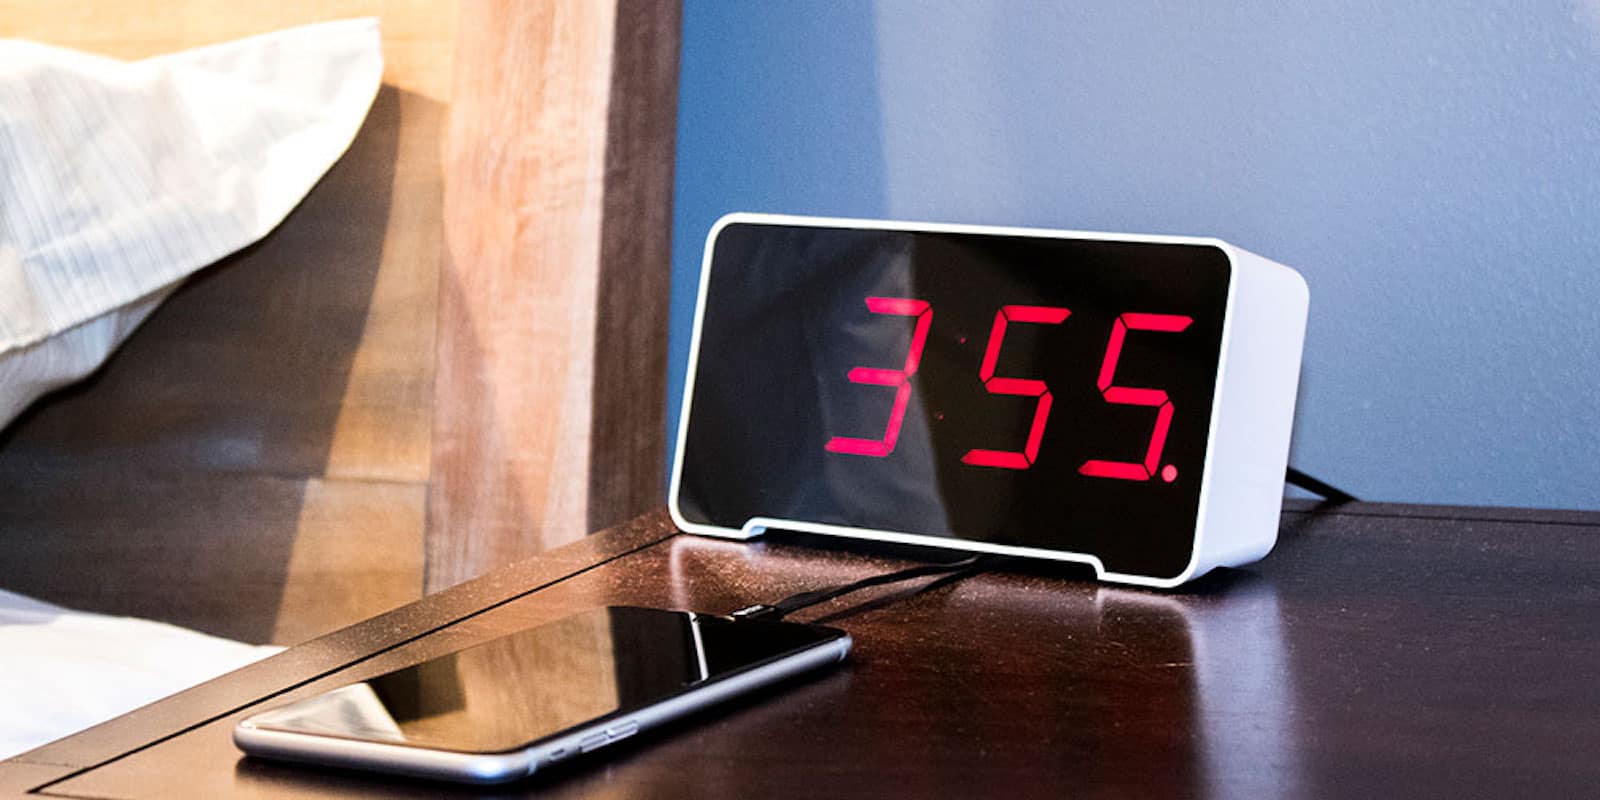 This classic alarm clock comes with 4 USB ports and some other cool features.